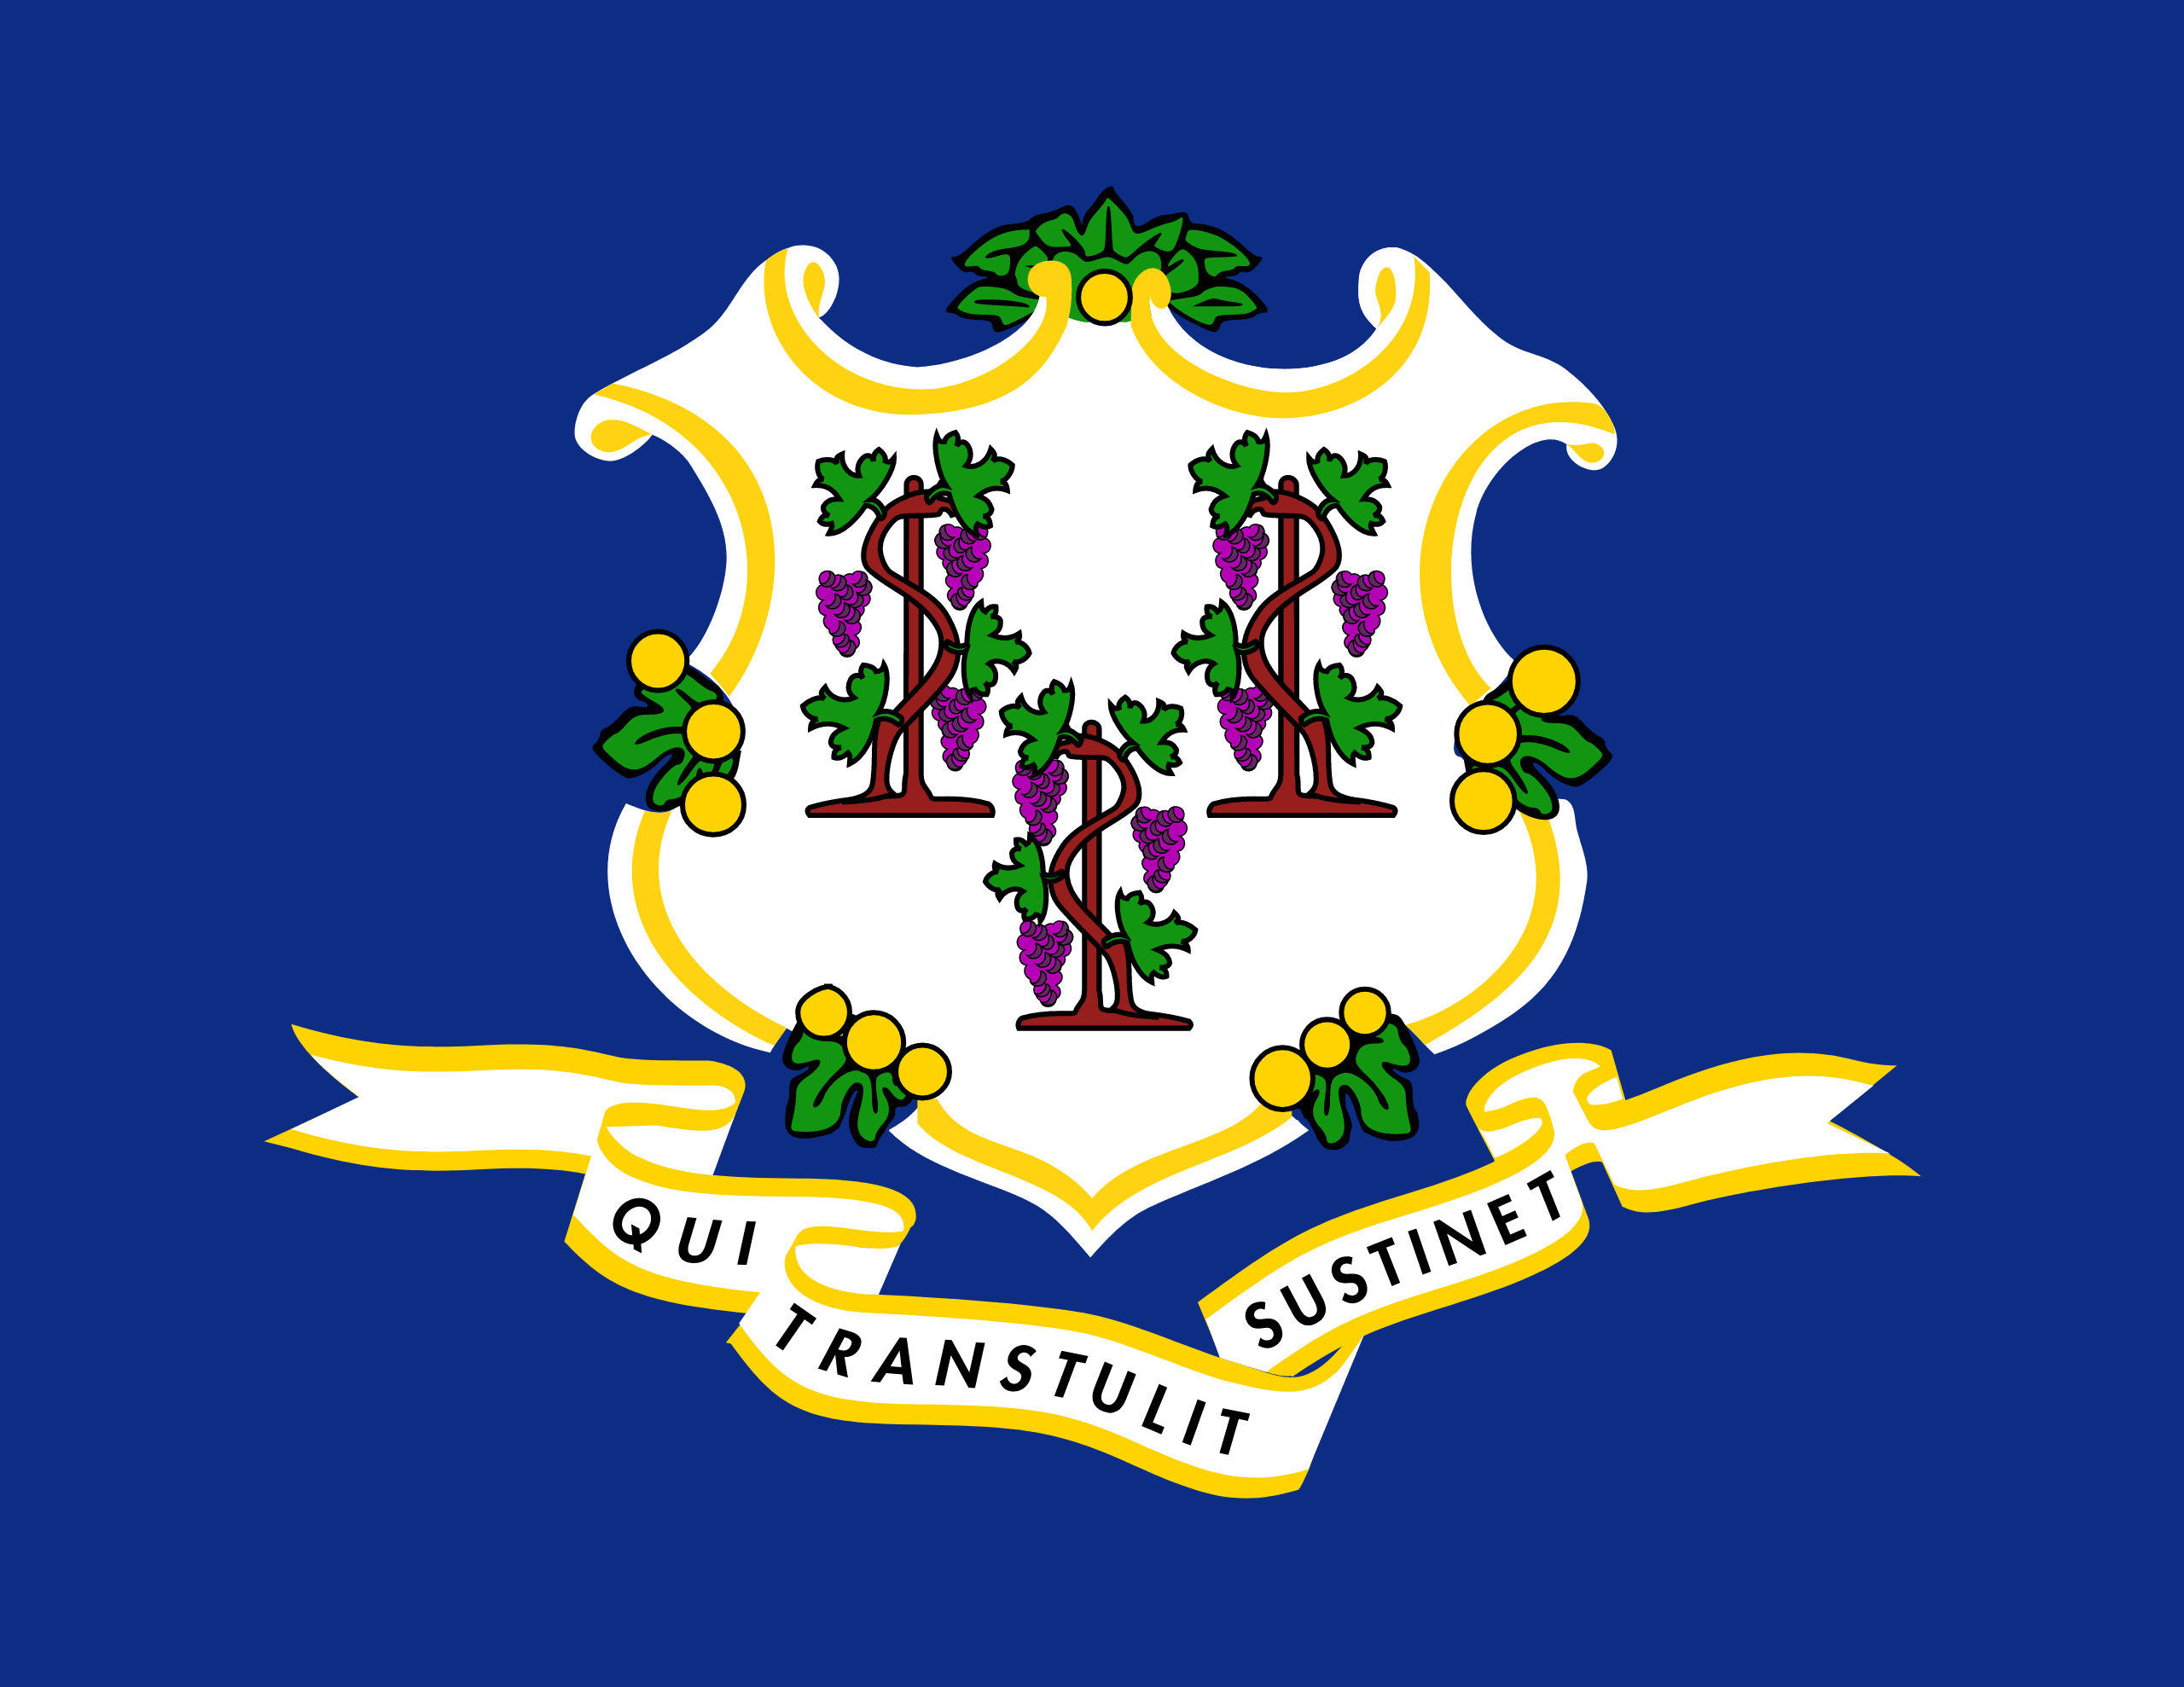 What is the capital of Connecticut?